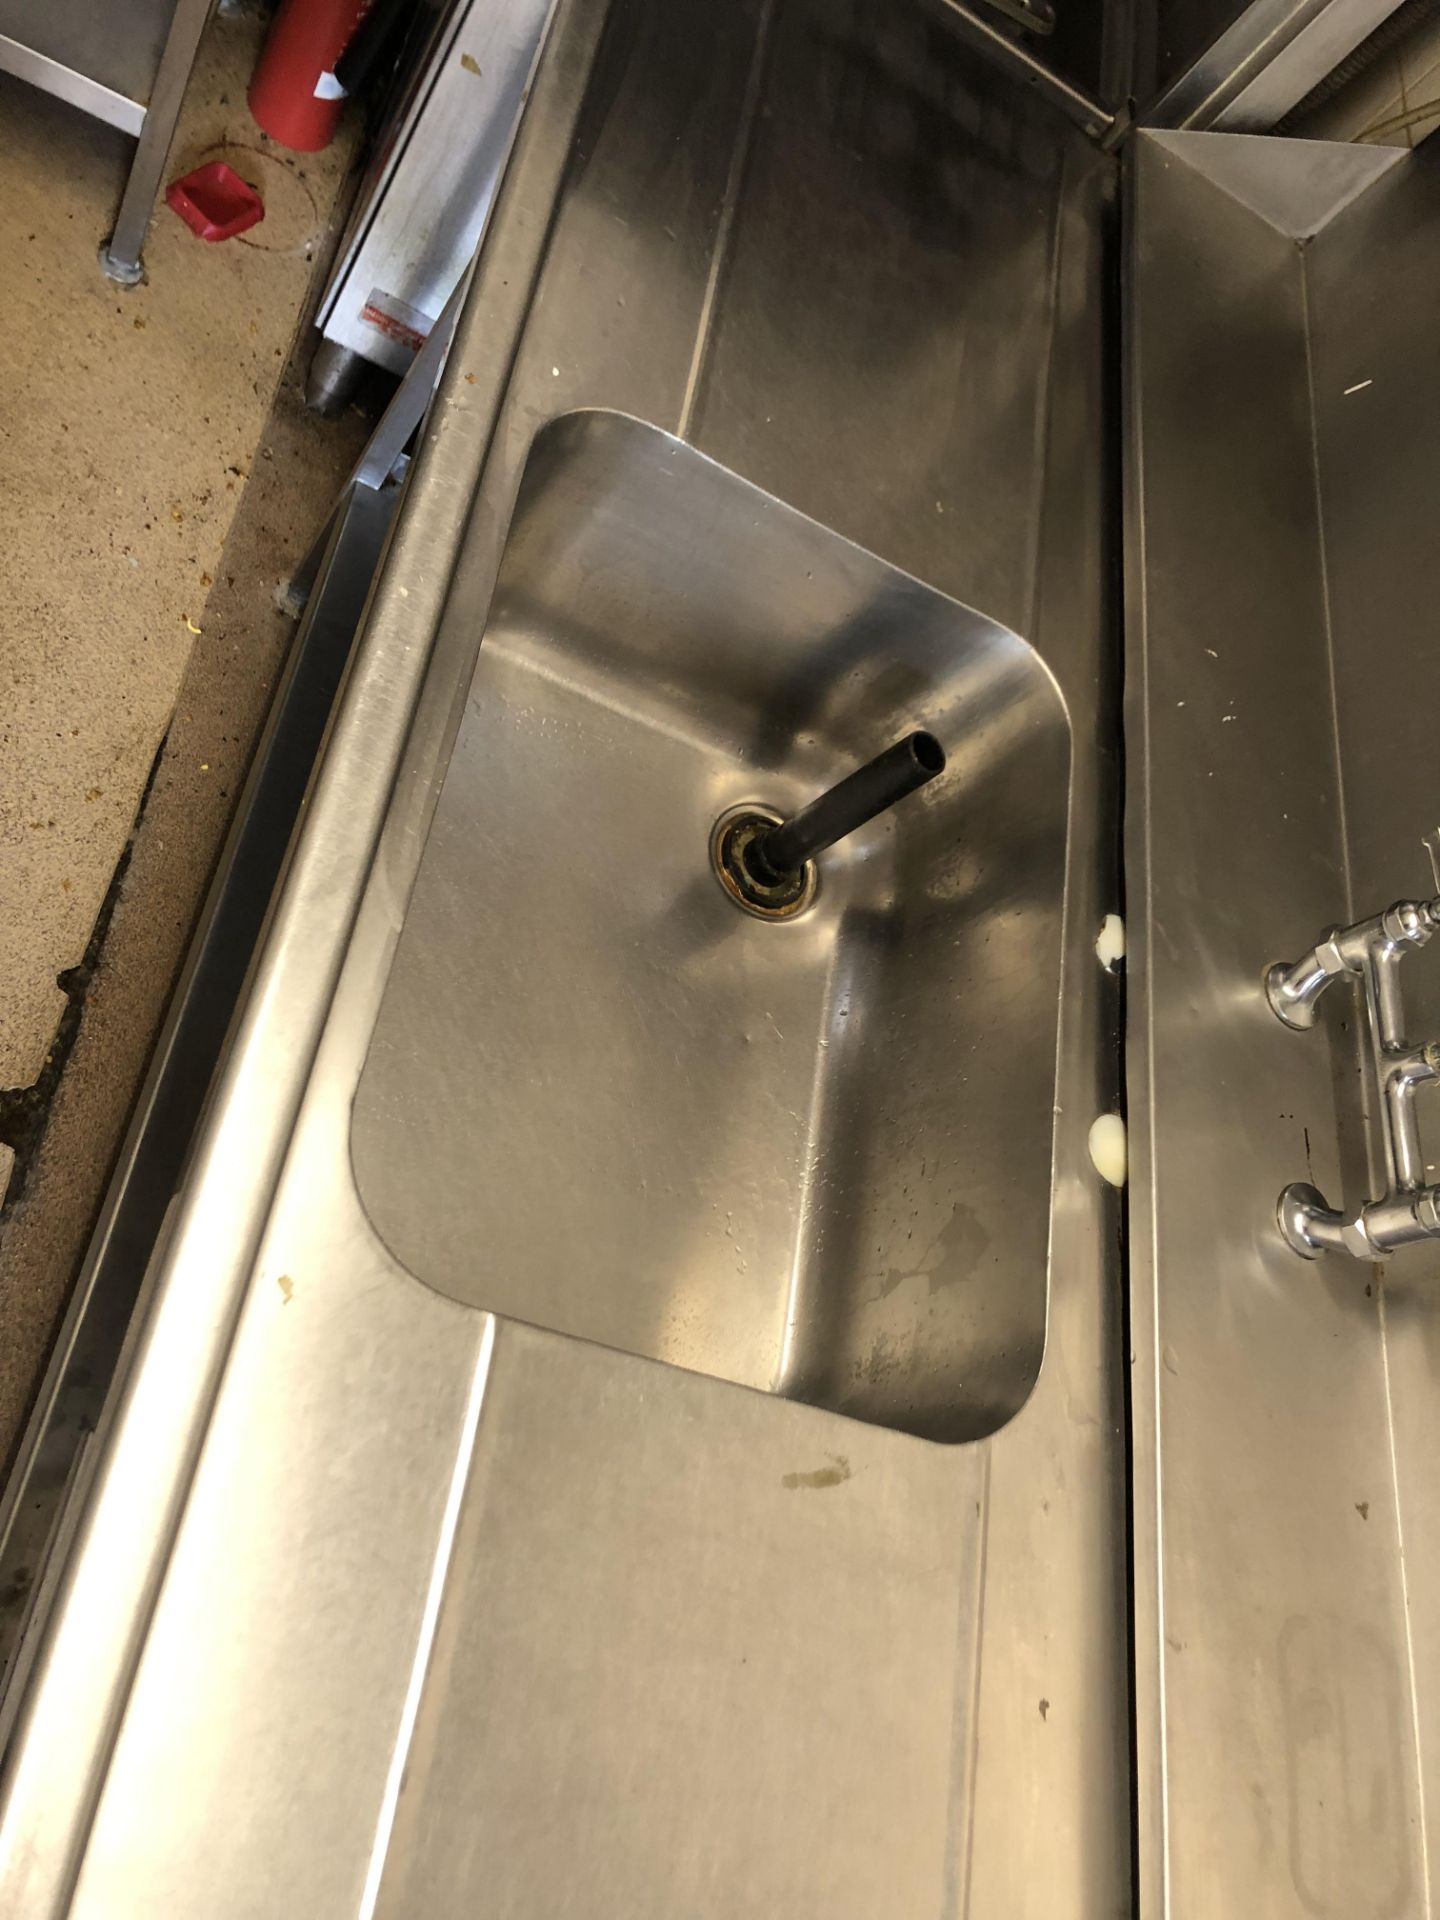 Stainless Steel Sink Unit with Tap - Image 4 of 8